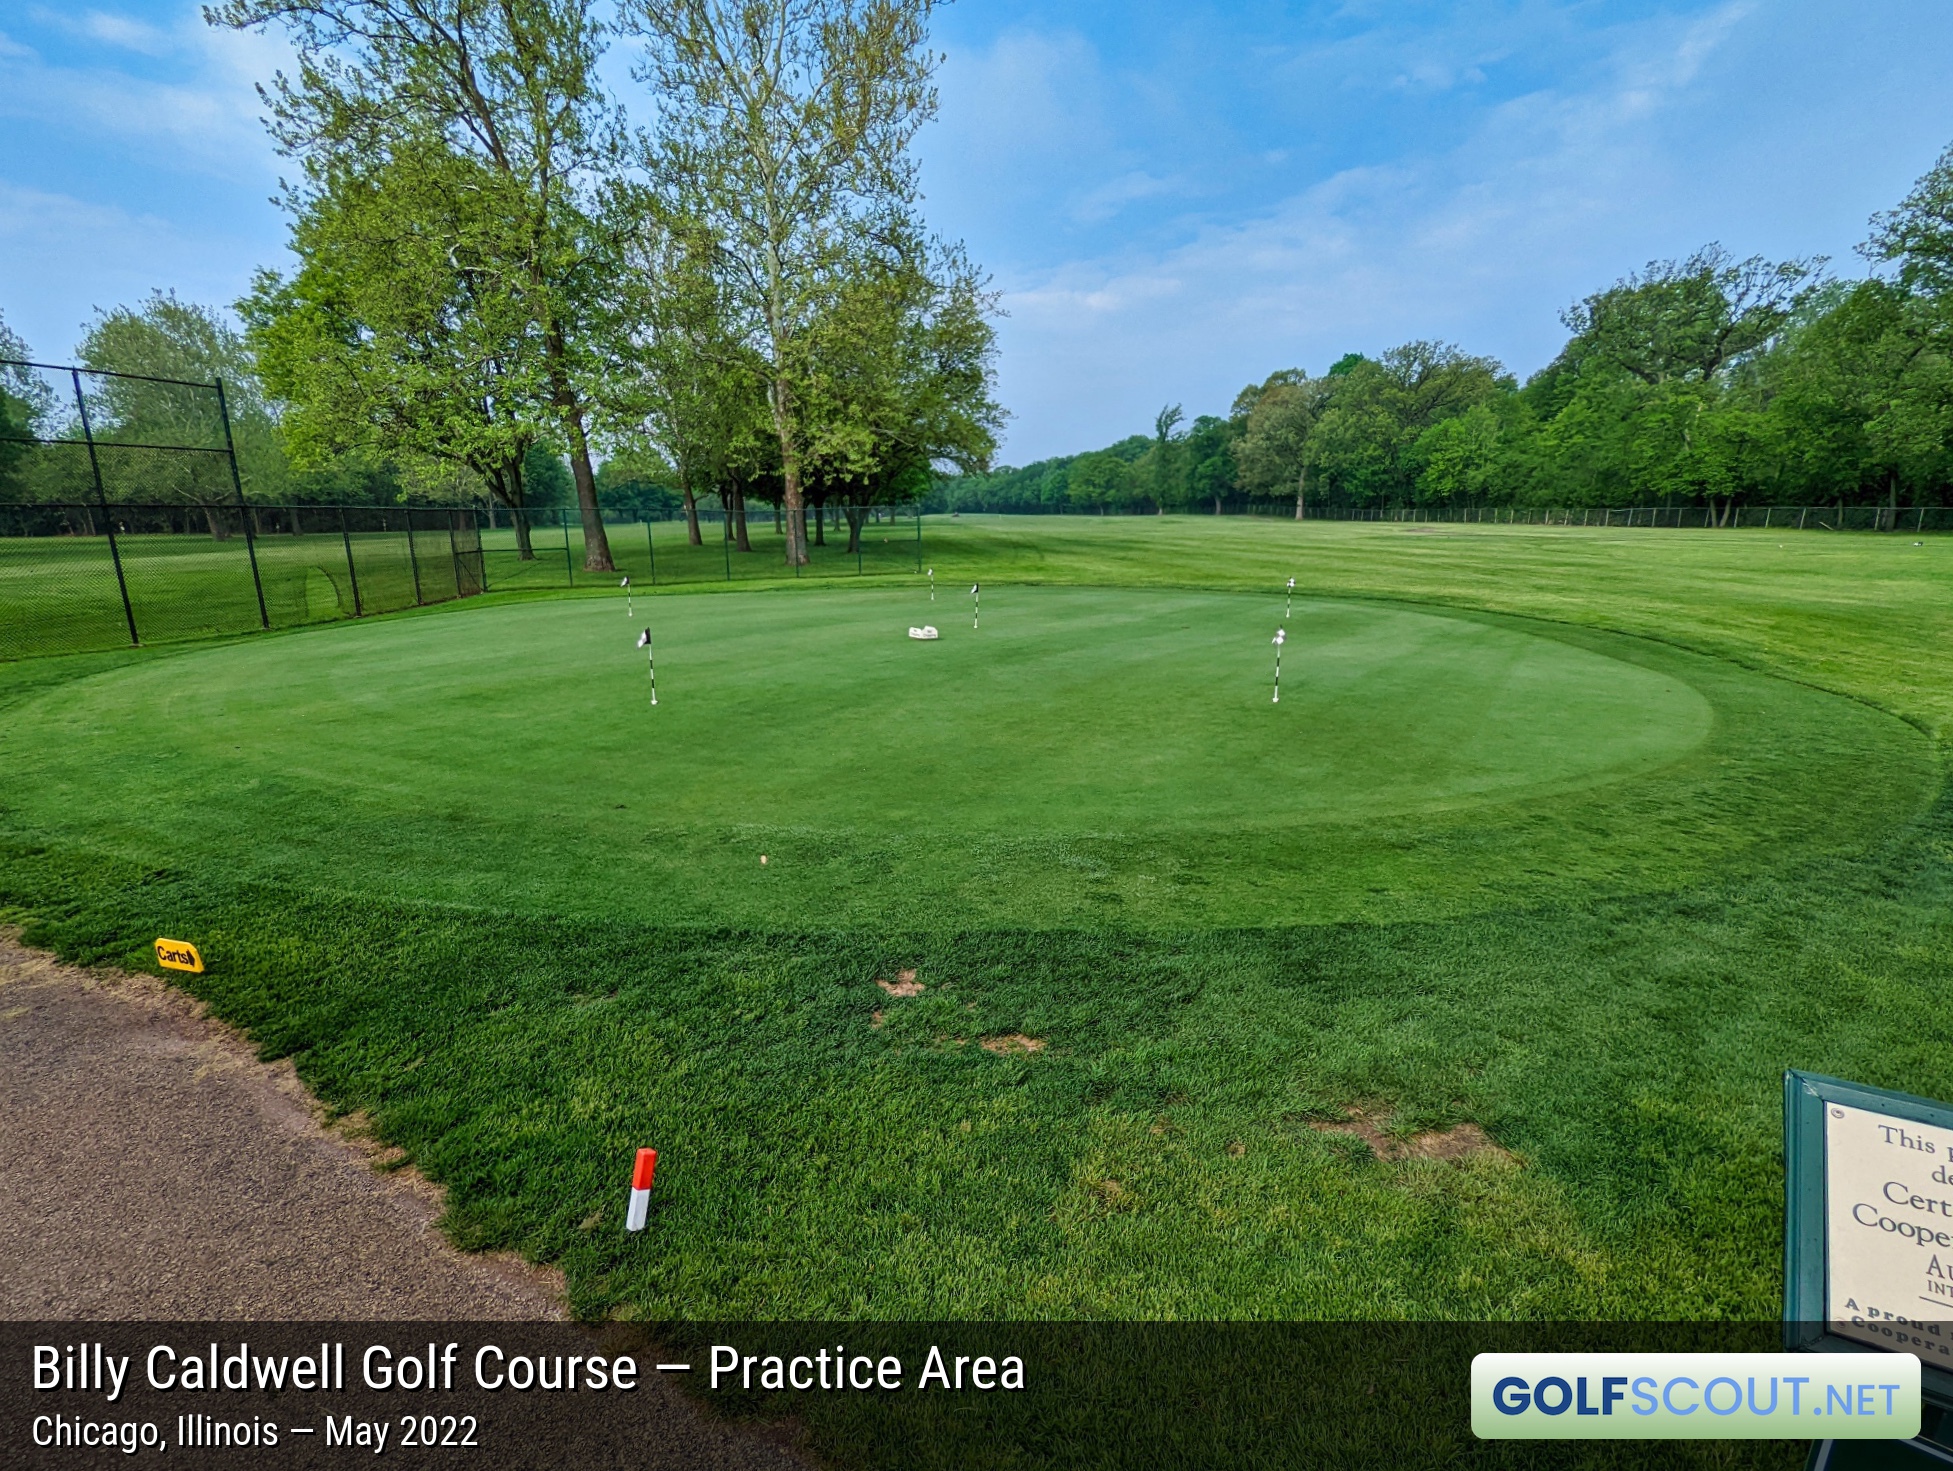 Photo of the practice area at Billy Caldwell Golf Course in Chicago, Illinois. This is the main practice green at Billy Caldwell. You used to be able to chip and putt on it, but there's a no chipping sign on it now.